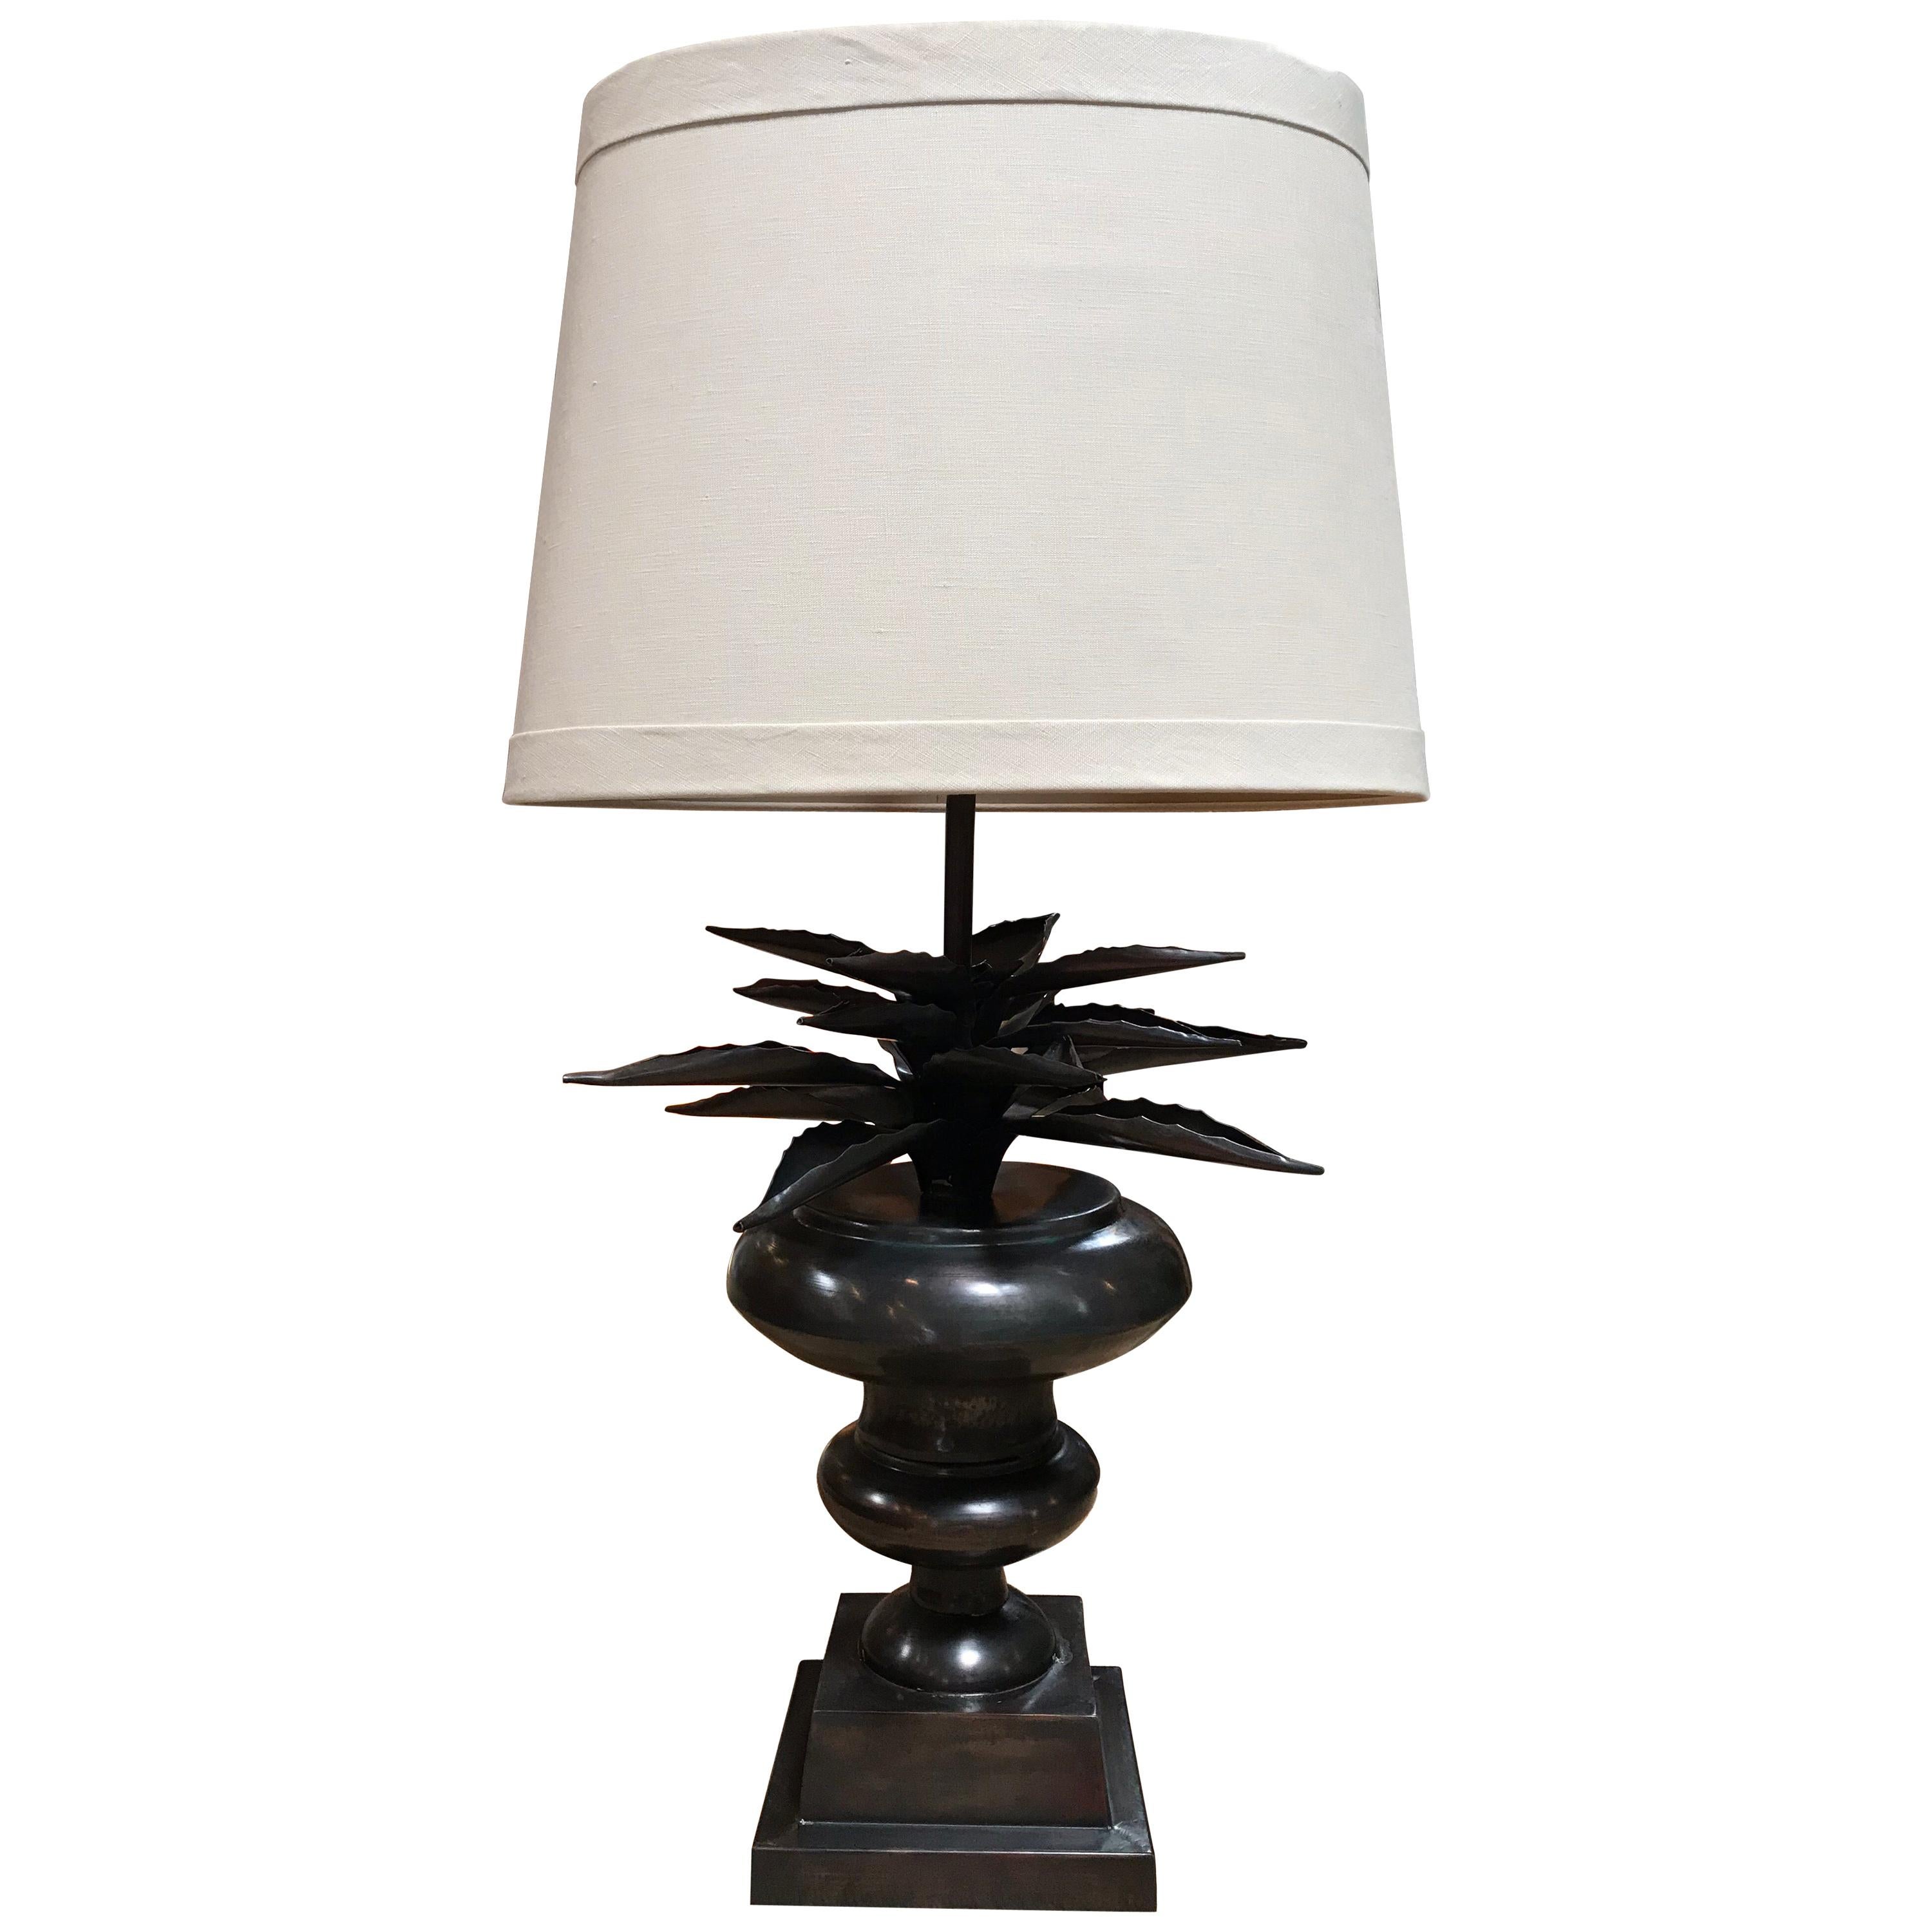 Metal Cast Agave Lamp with Shade For Sale